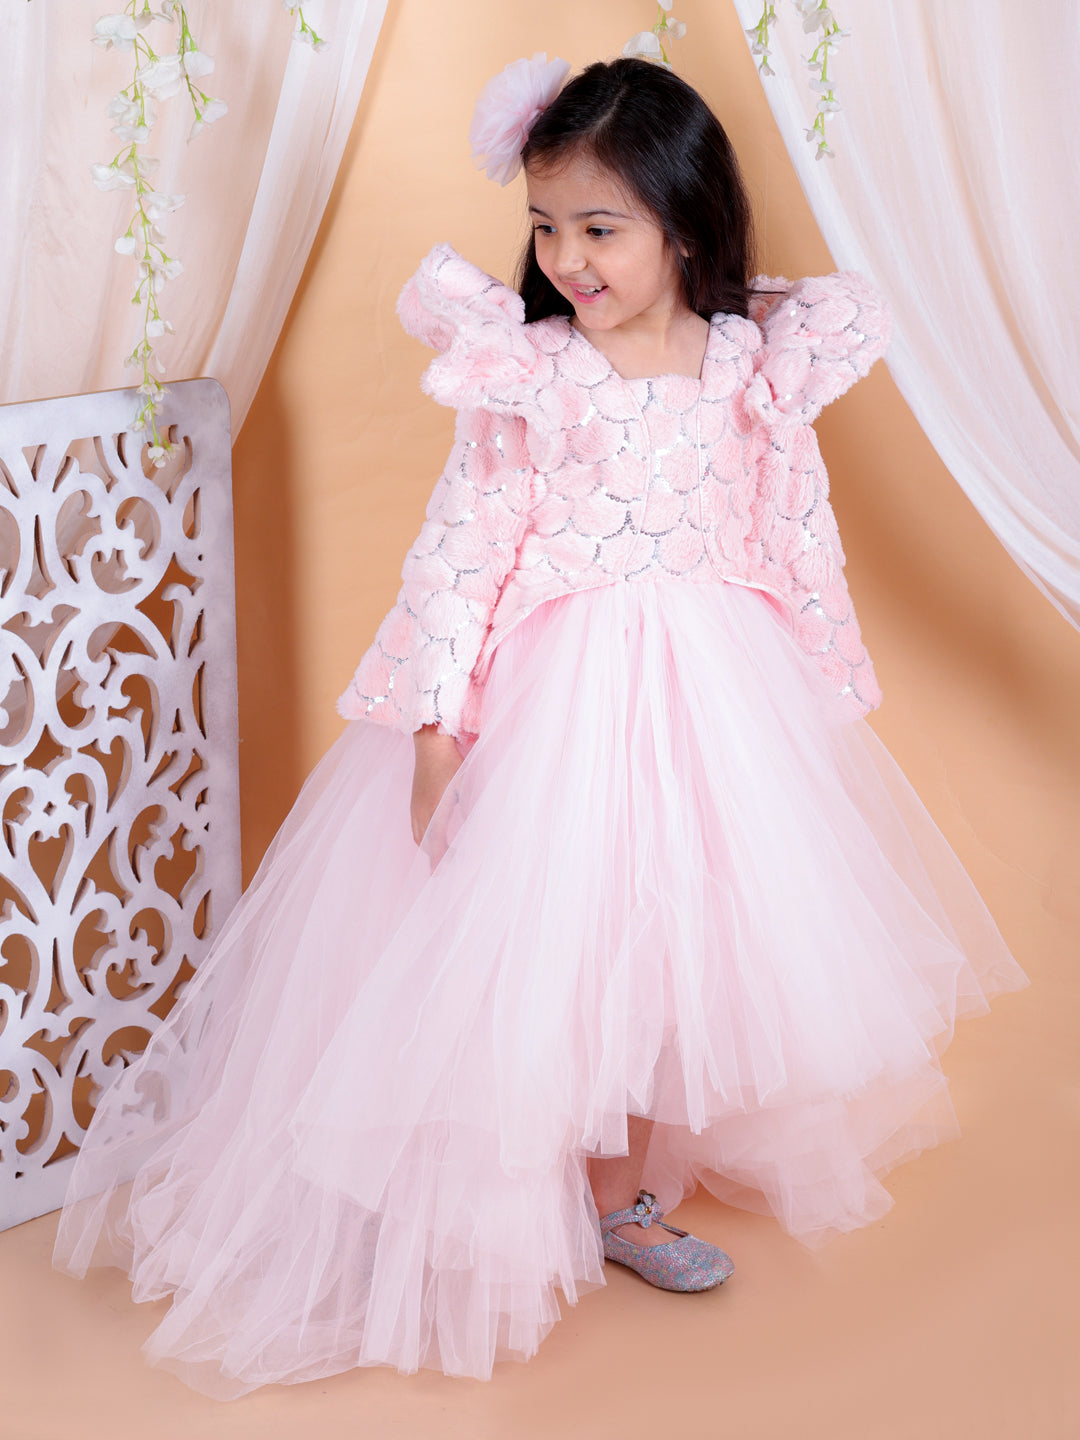 BownBee Heavy High Low Net Party Frock Dress with Hairclip for Girls- Pink